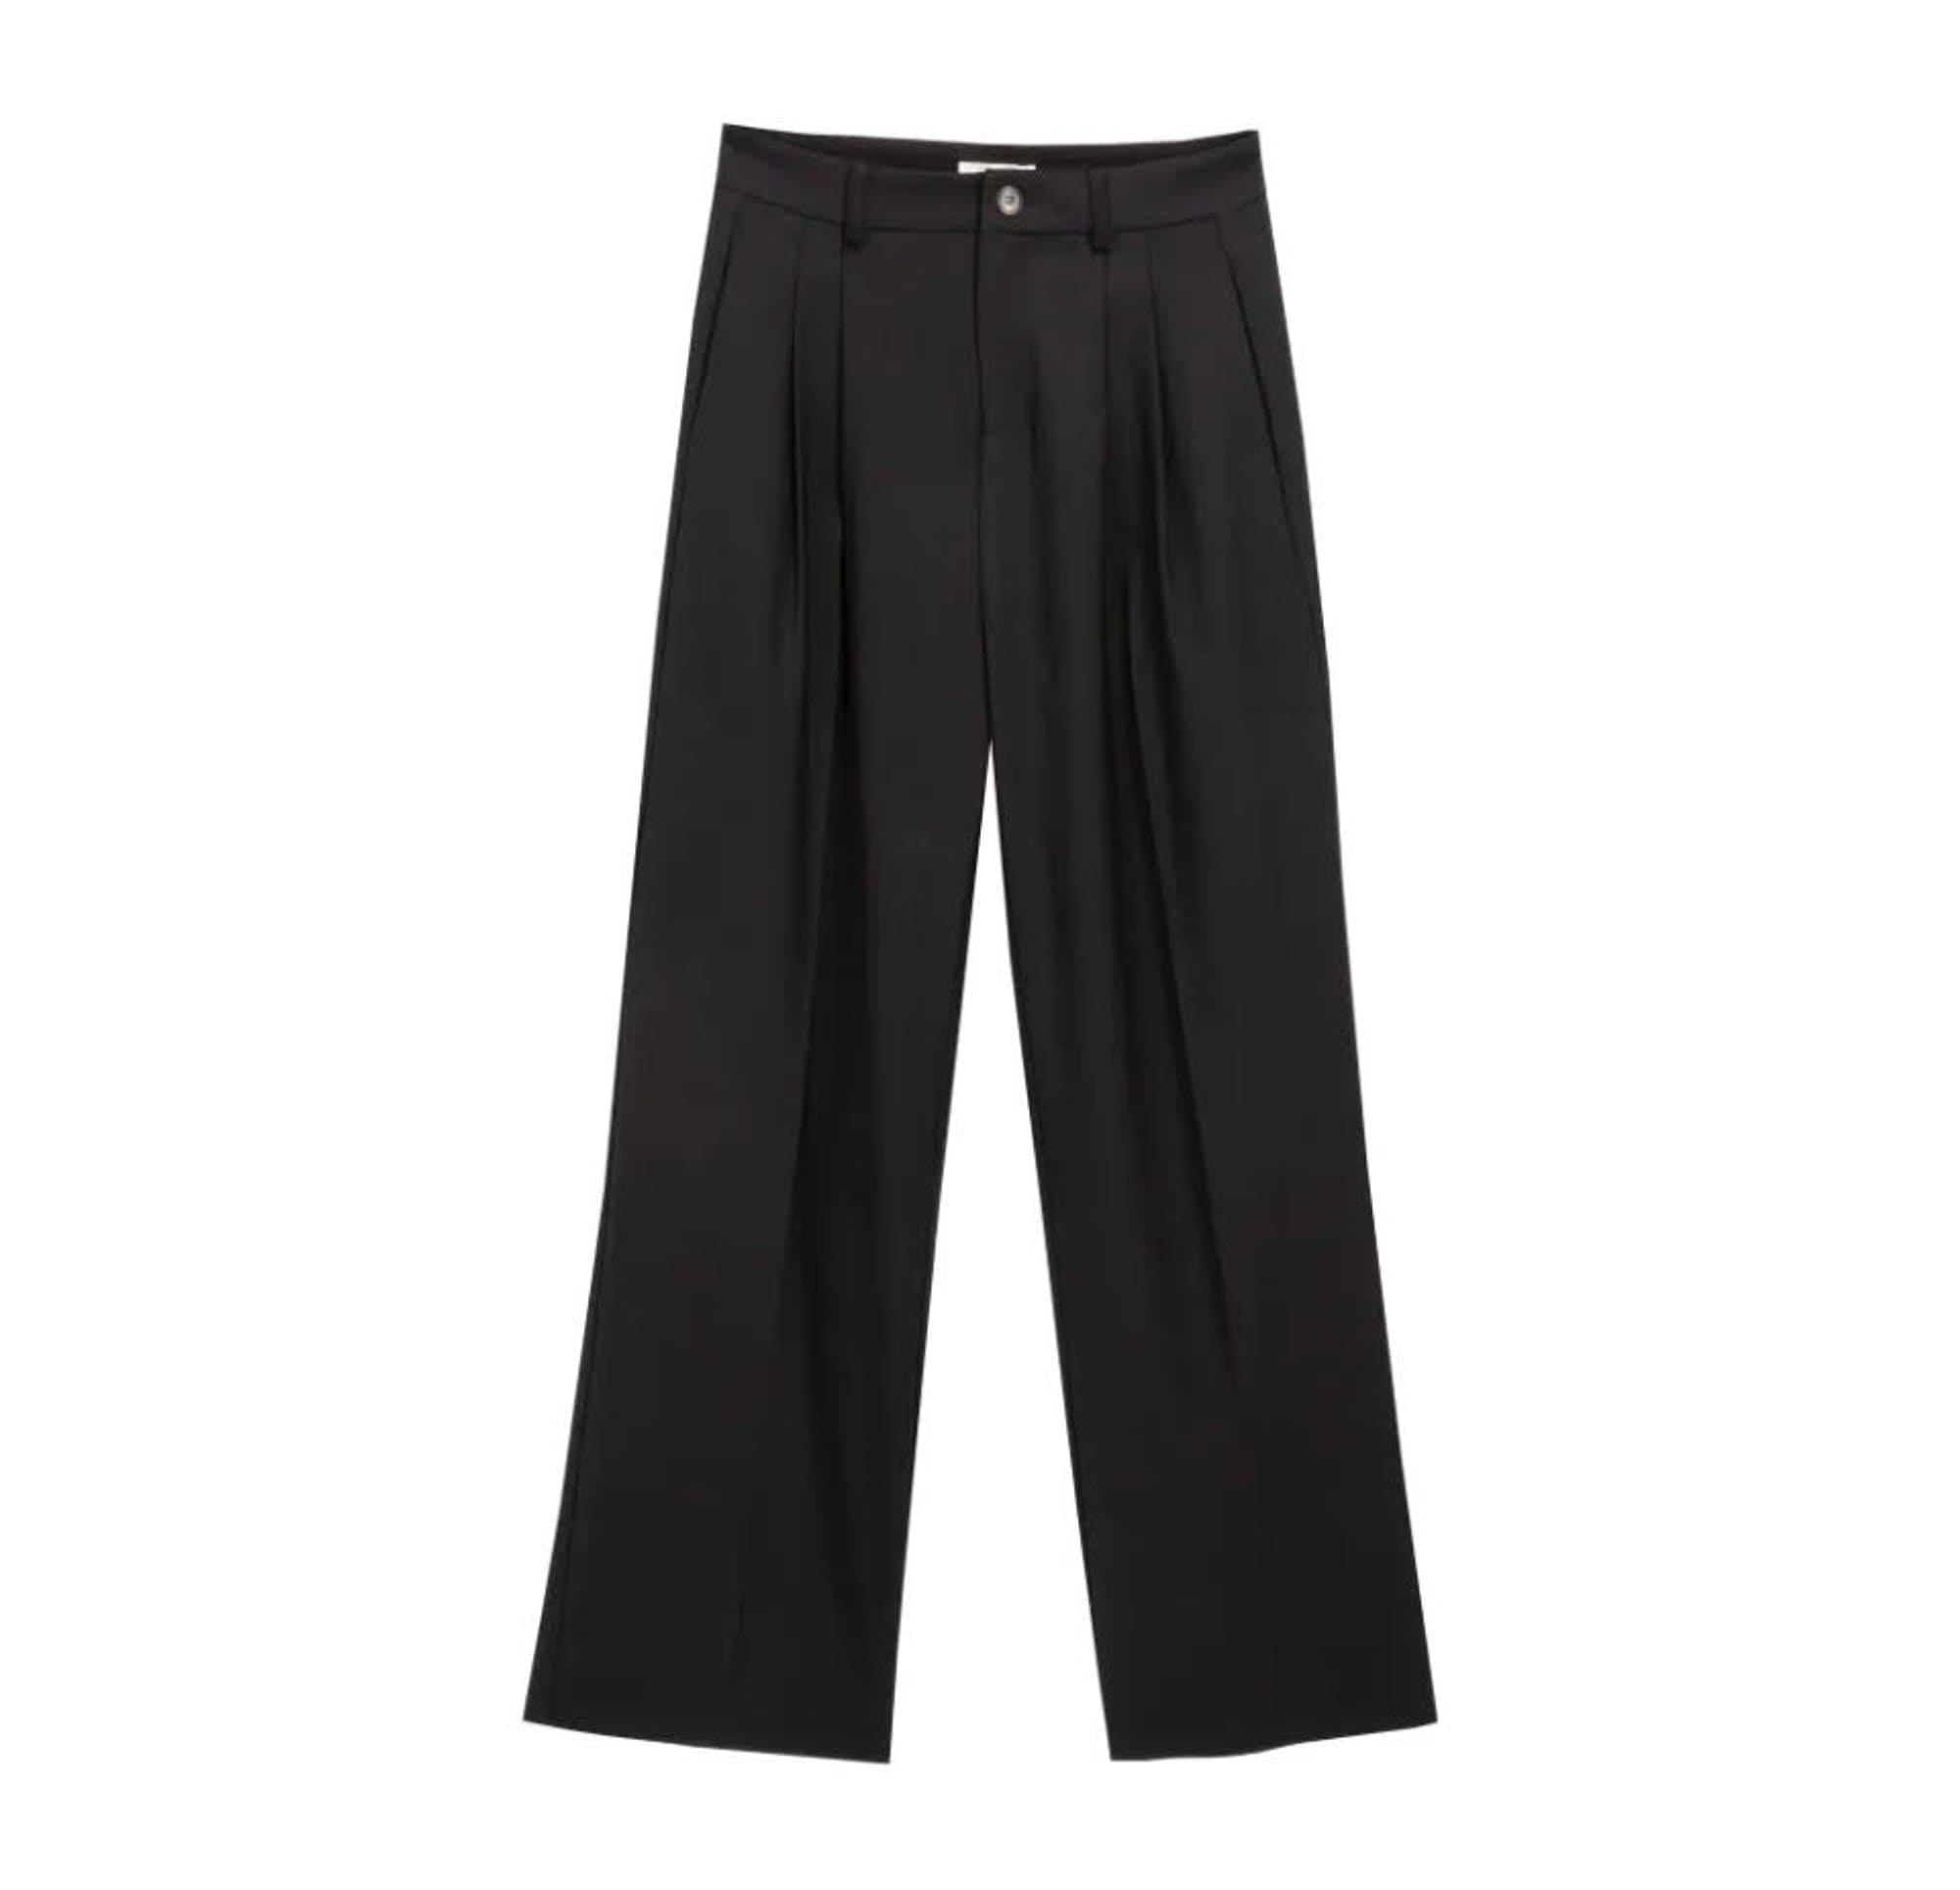 Sweewe French Trousers in Black 